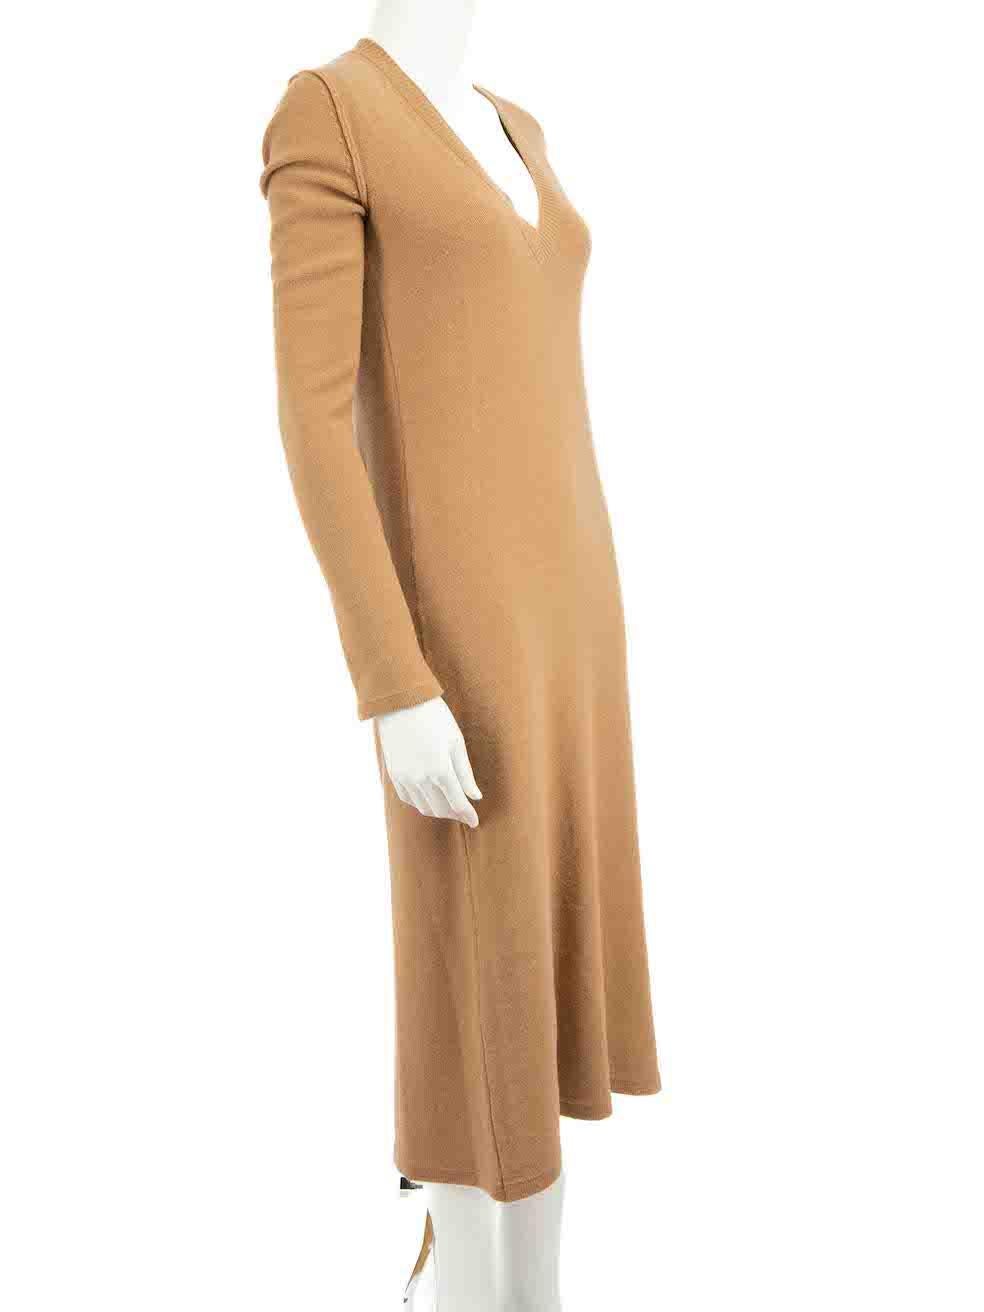 CONDITION is Very good. Minimal wear to dress is evident. Minimal pilling to overall wool material on this used Chloé designer resale item.
 
 
 
 Details
 
 
 Camel
 
 Wool
 
 Knit dress
 
 Midi
 
 Long sleeves
 
 V-neck
 
 Exposed shoulder seams
